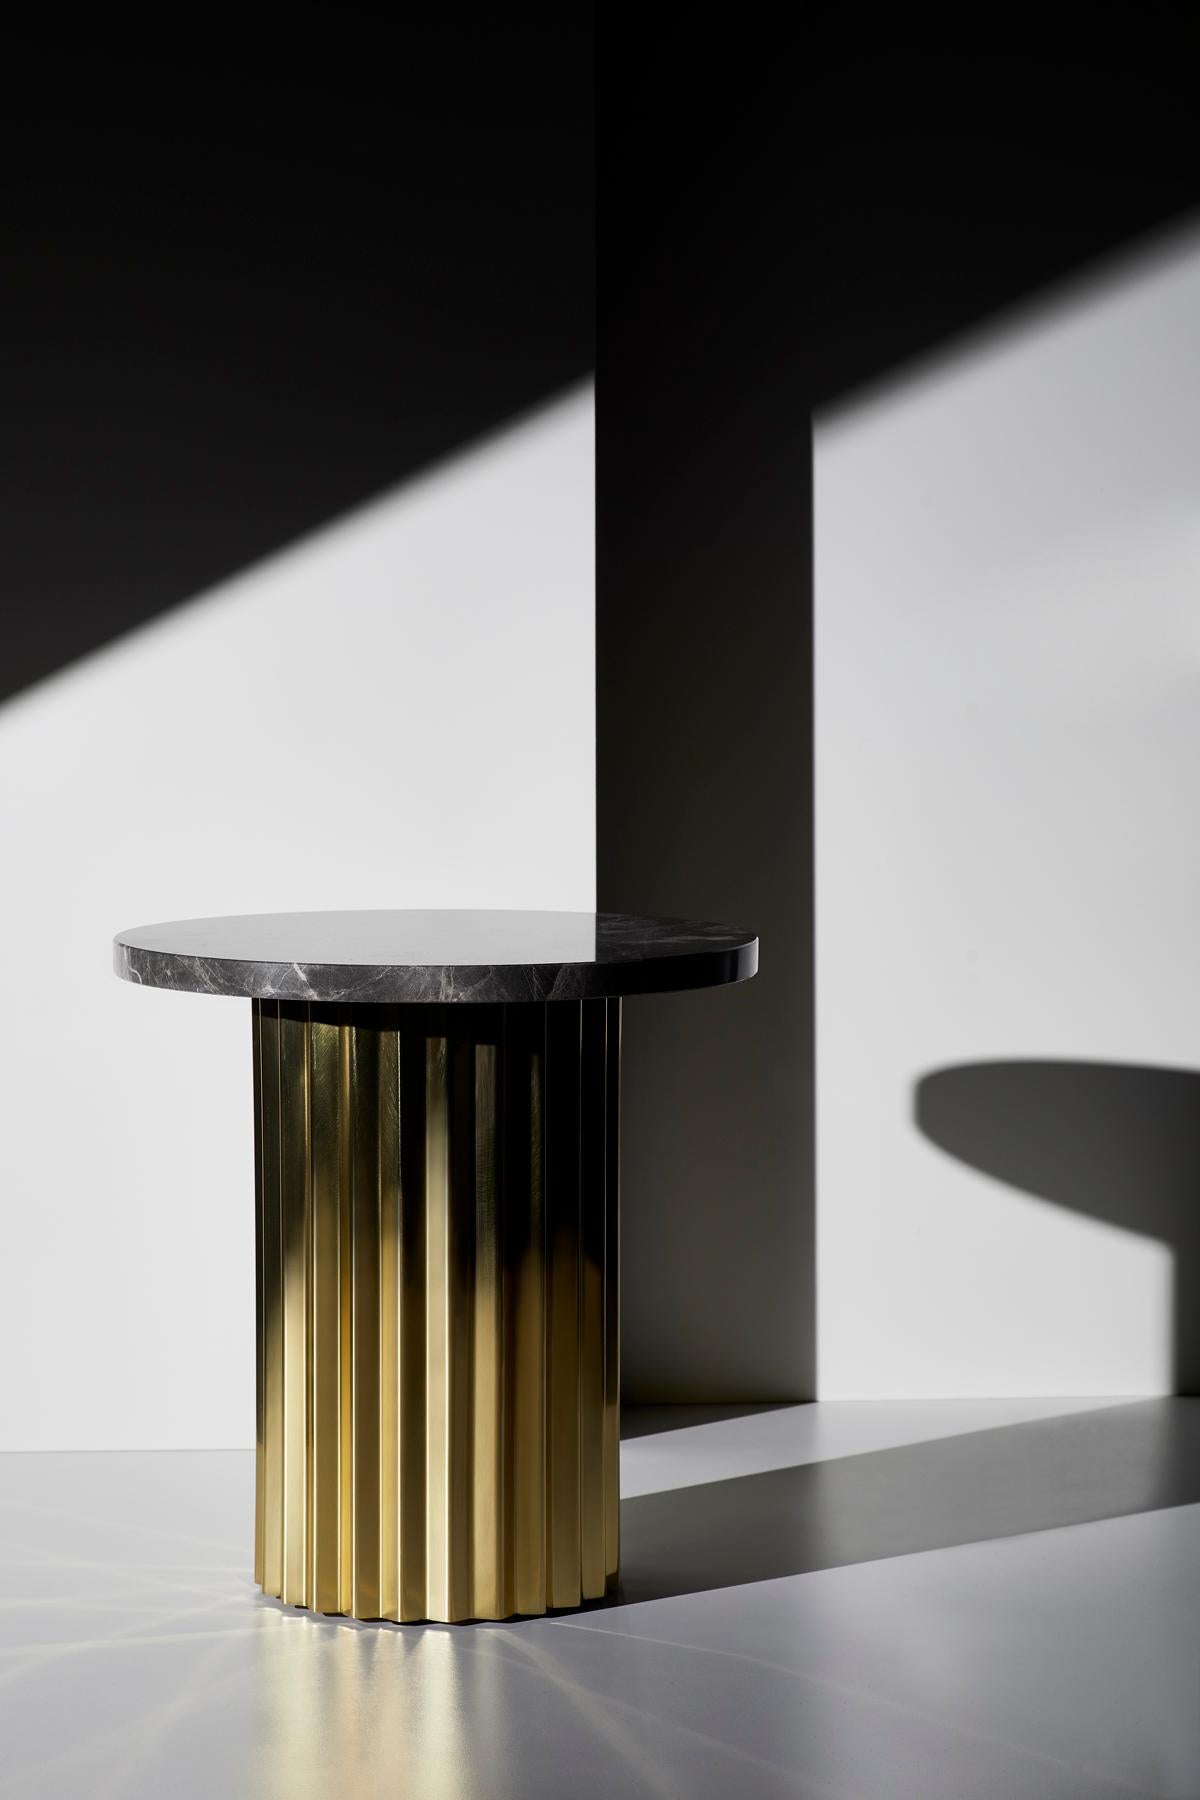 Set of 2 marble tables by Lisette Rützou.
Dimensions:
D 60 x H 41 cm
D 40 x H 41 cm
Materials: Marble, oak tabletop, brass column.


 Lisette Rützou’s design is motivated by an urge to articulate a story. Inspired by the beauty of materials,